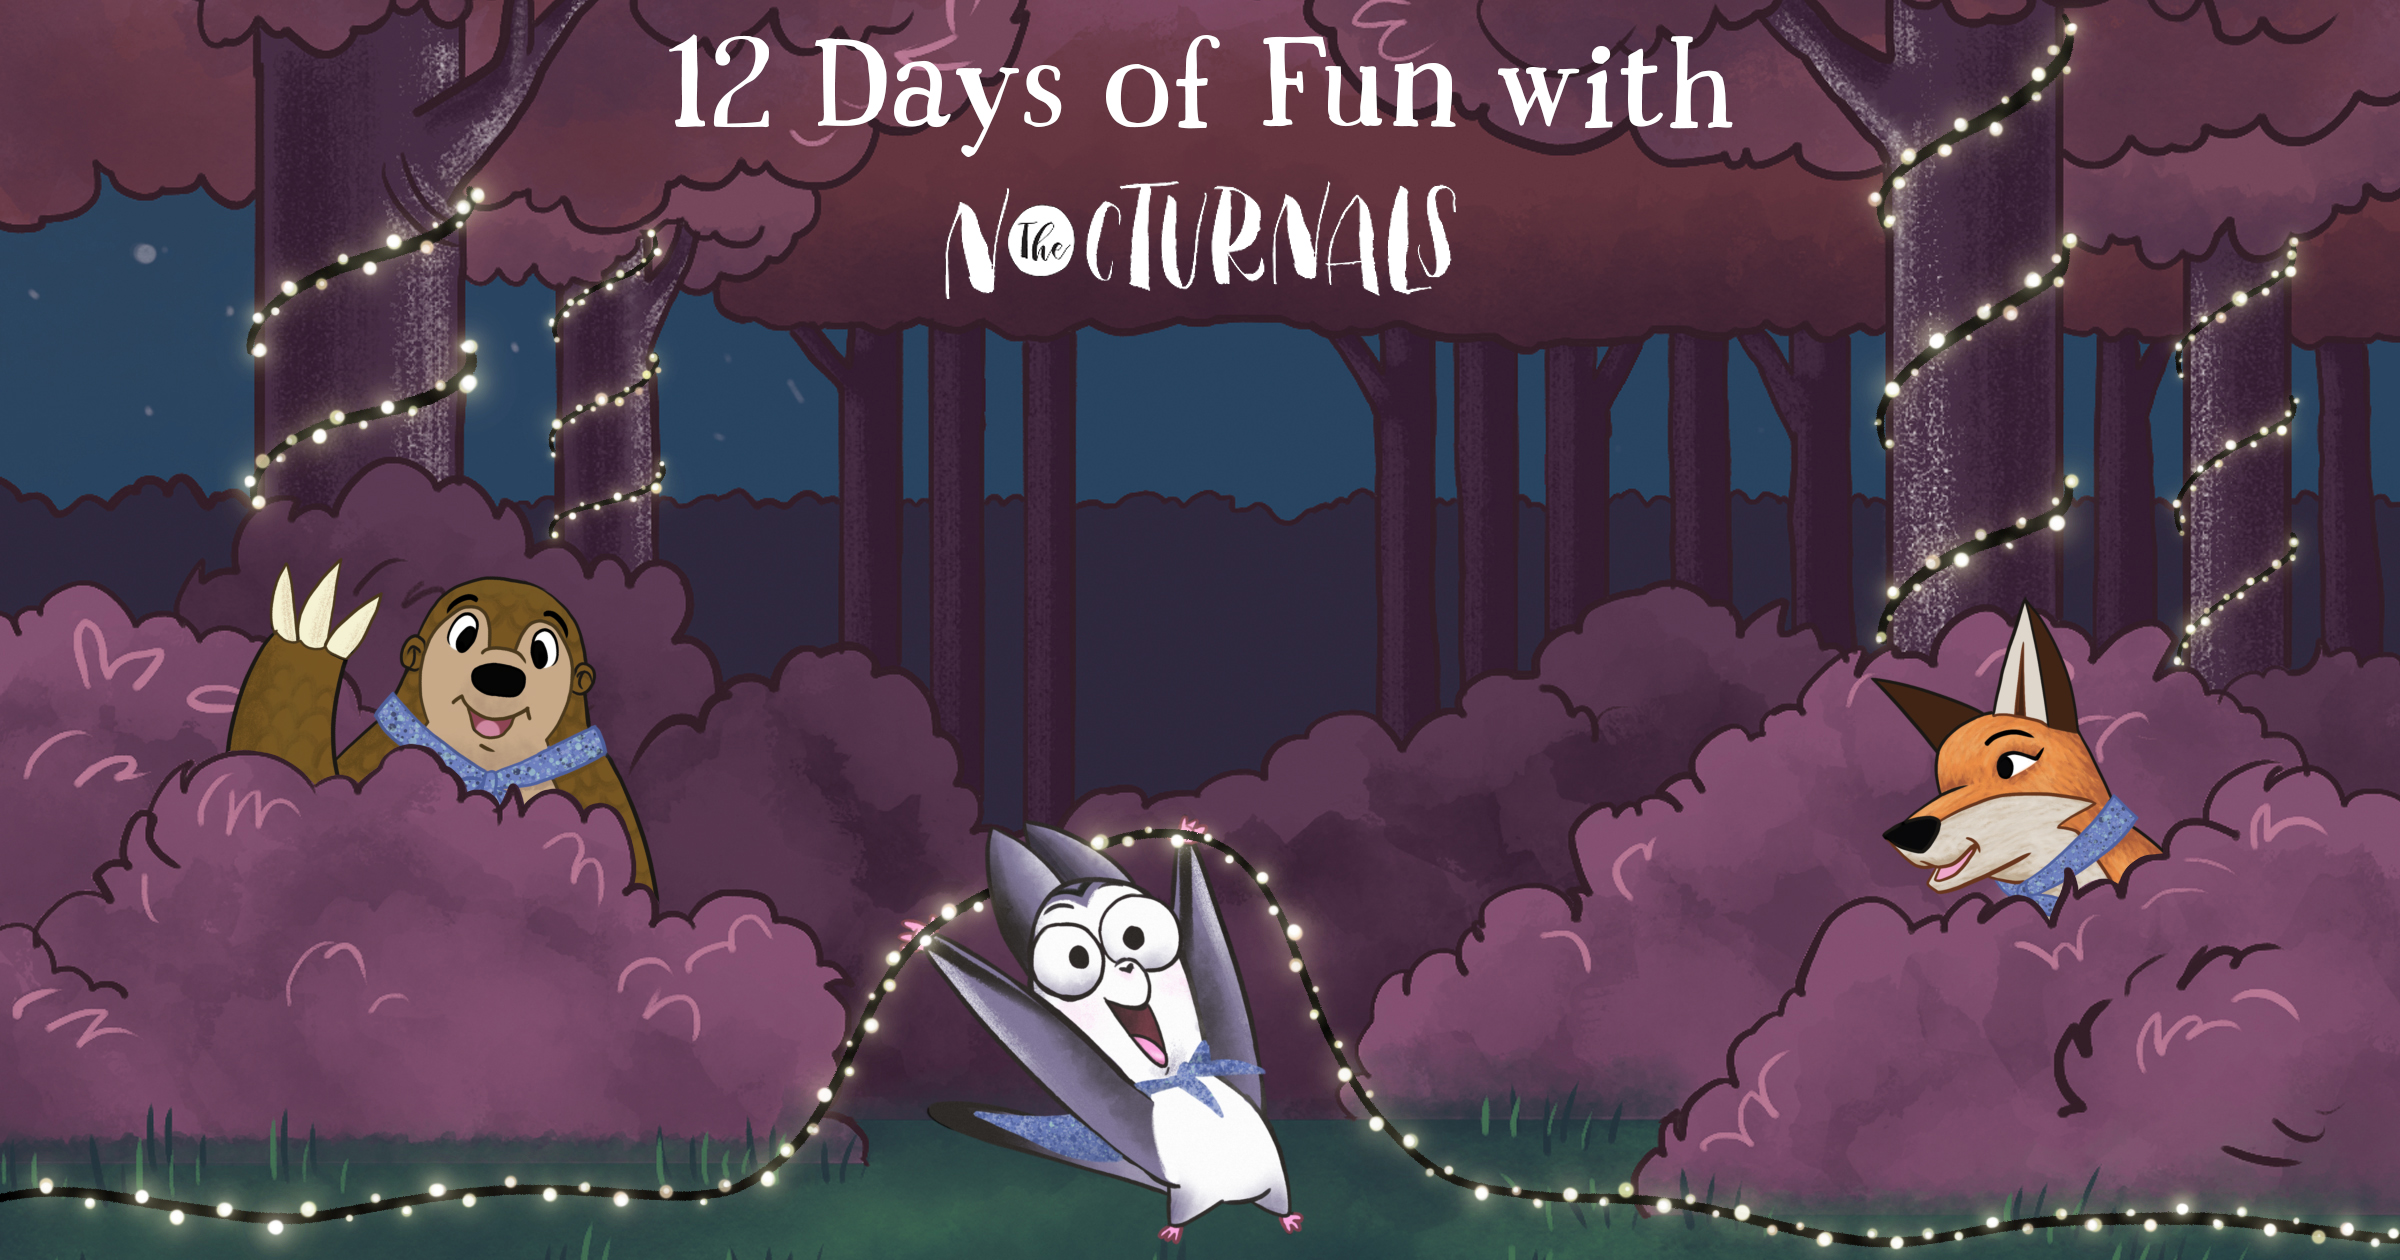 Tobin, a pangolin, is waving with his claw and hidden in a purple bush on the left side of the graphic. On the right is Dawn, a fox, smiling who is also hidden in a purple bush. Bismark, a sugar glider, is in the center holding up string lights that lead to the purple trees in the background that are already decorated. 